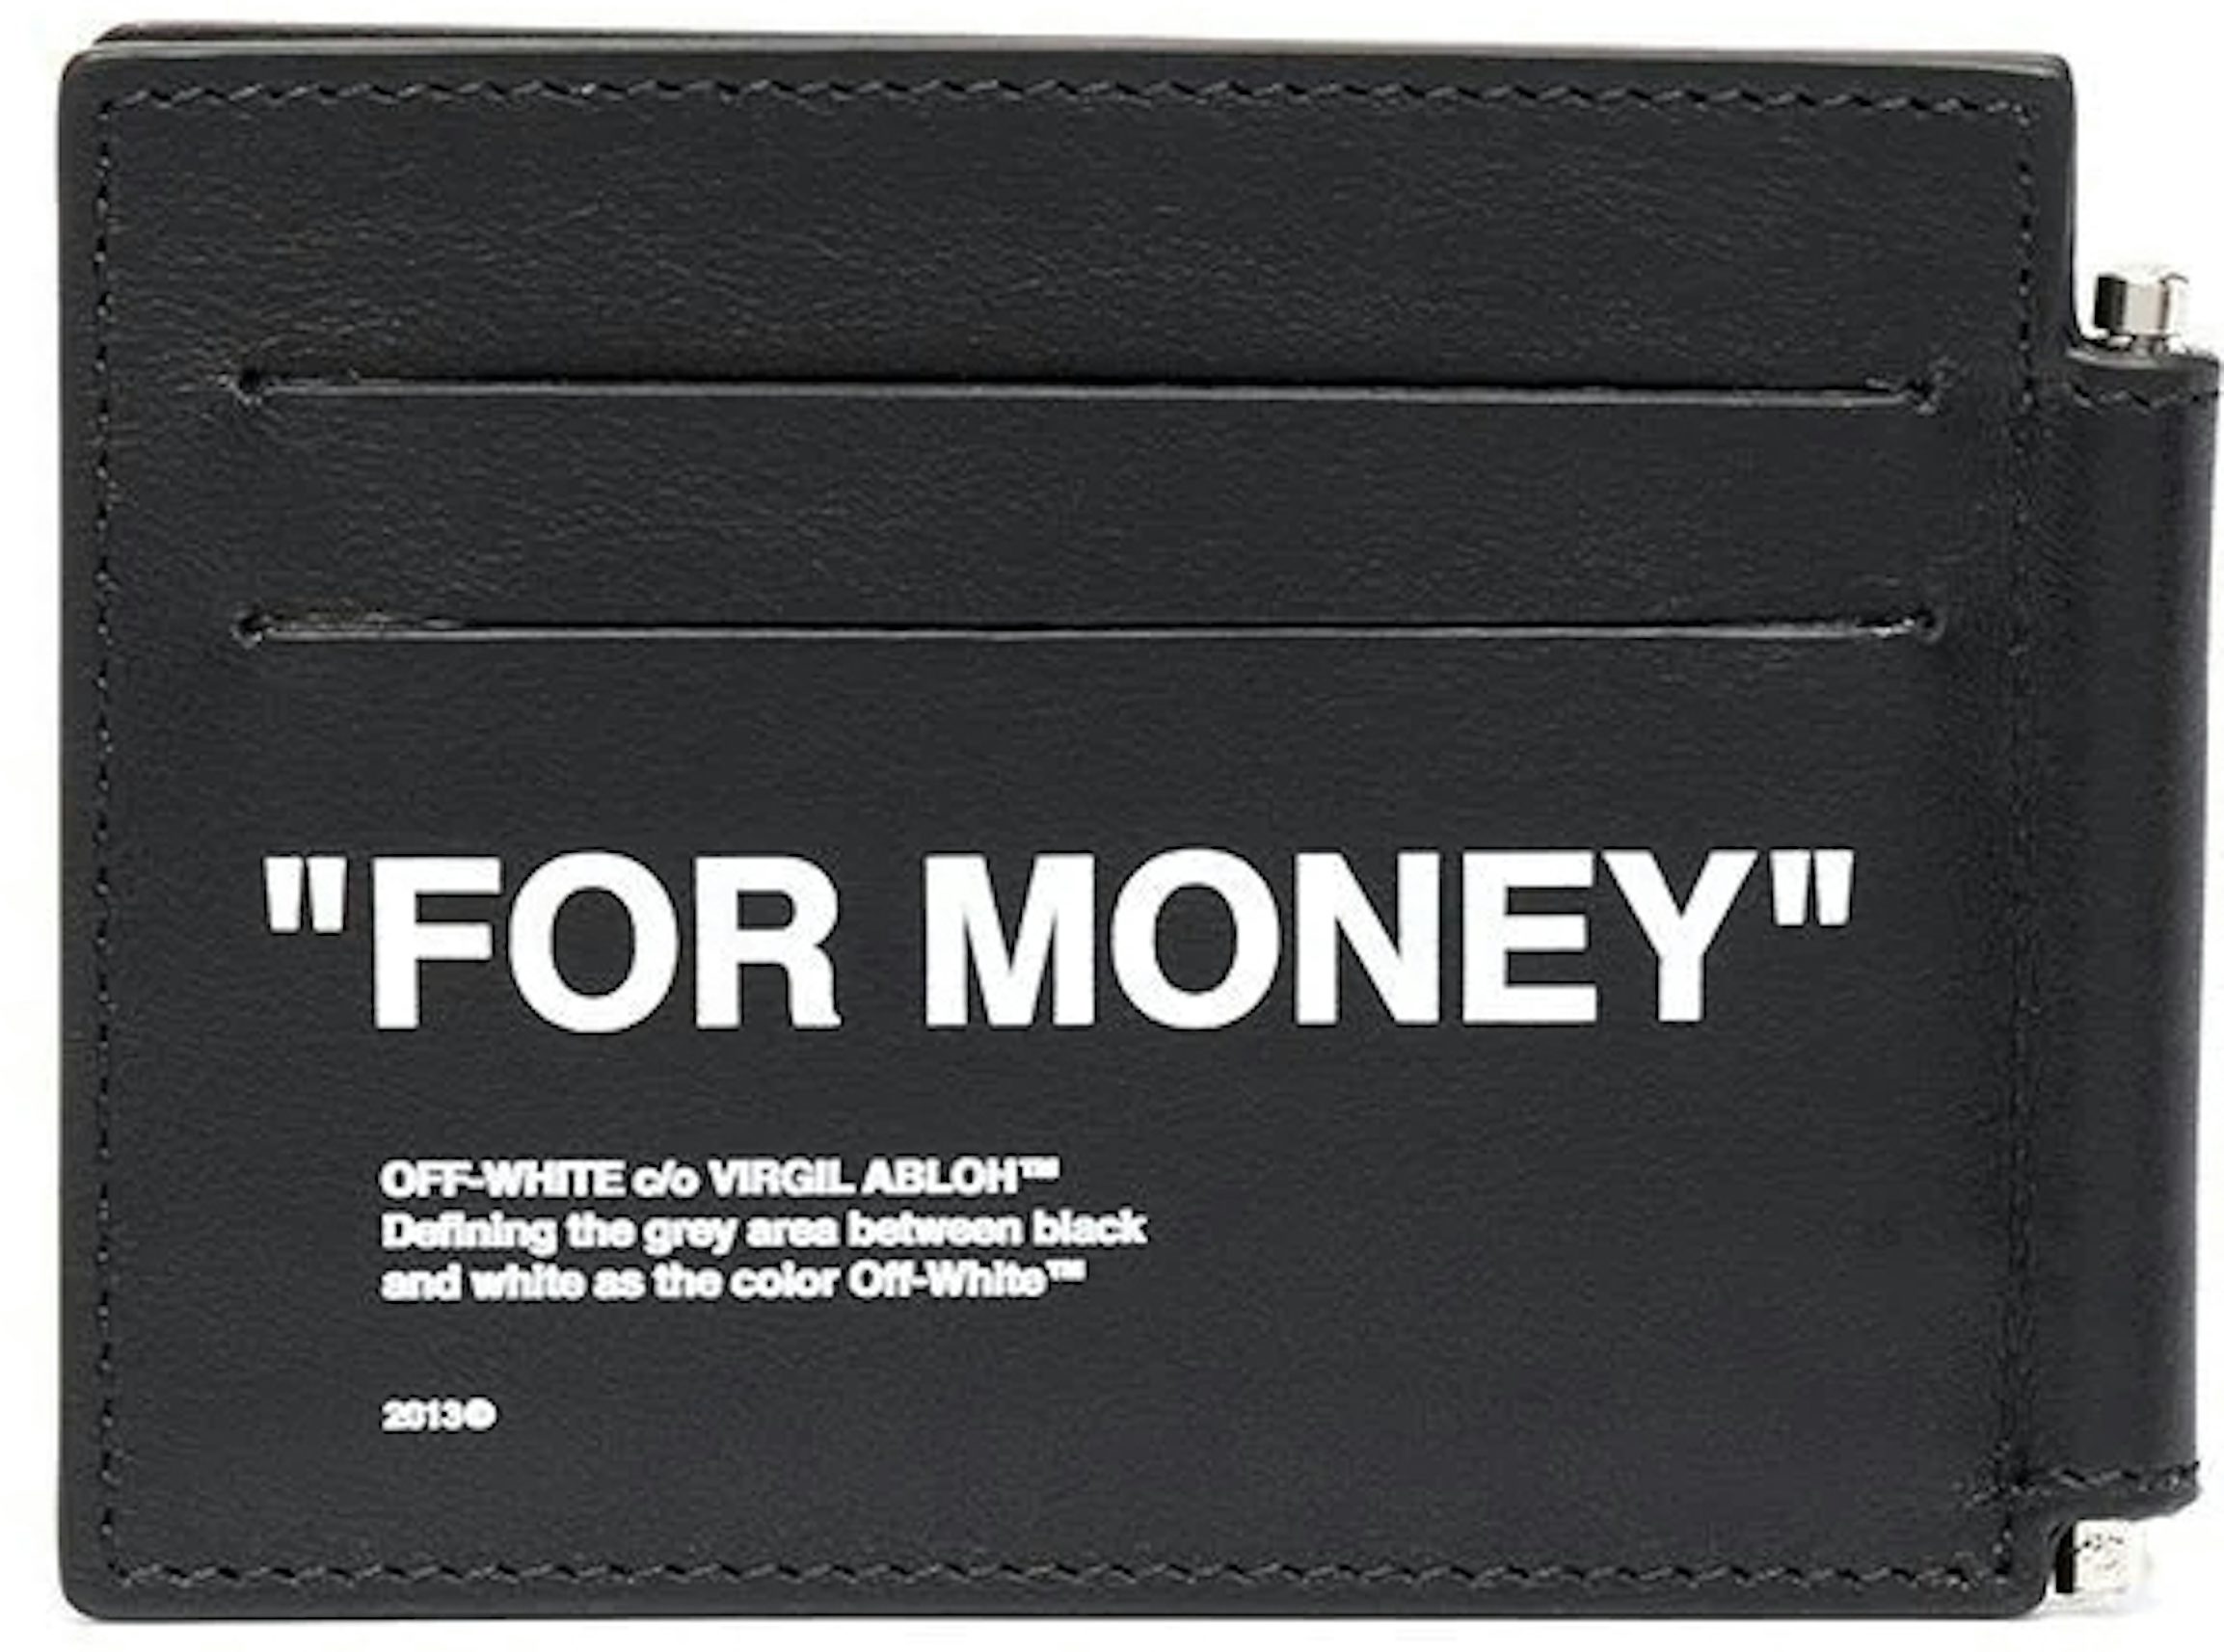 Christian Dior Wallet with Bill Clip, Black